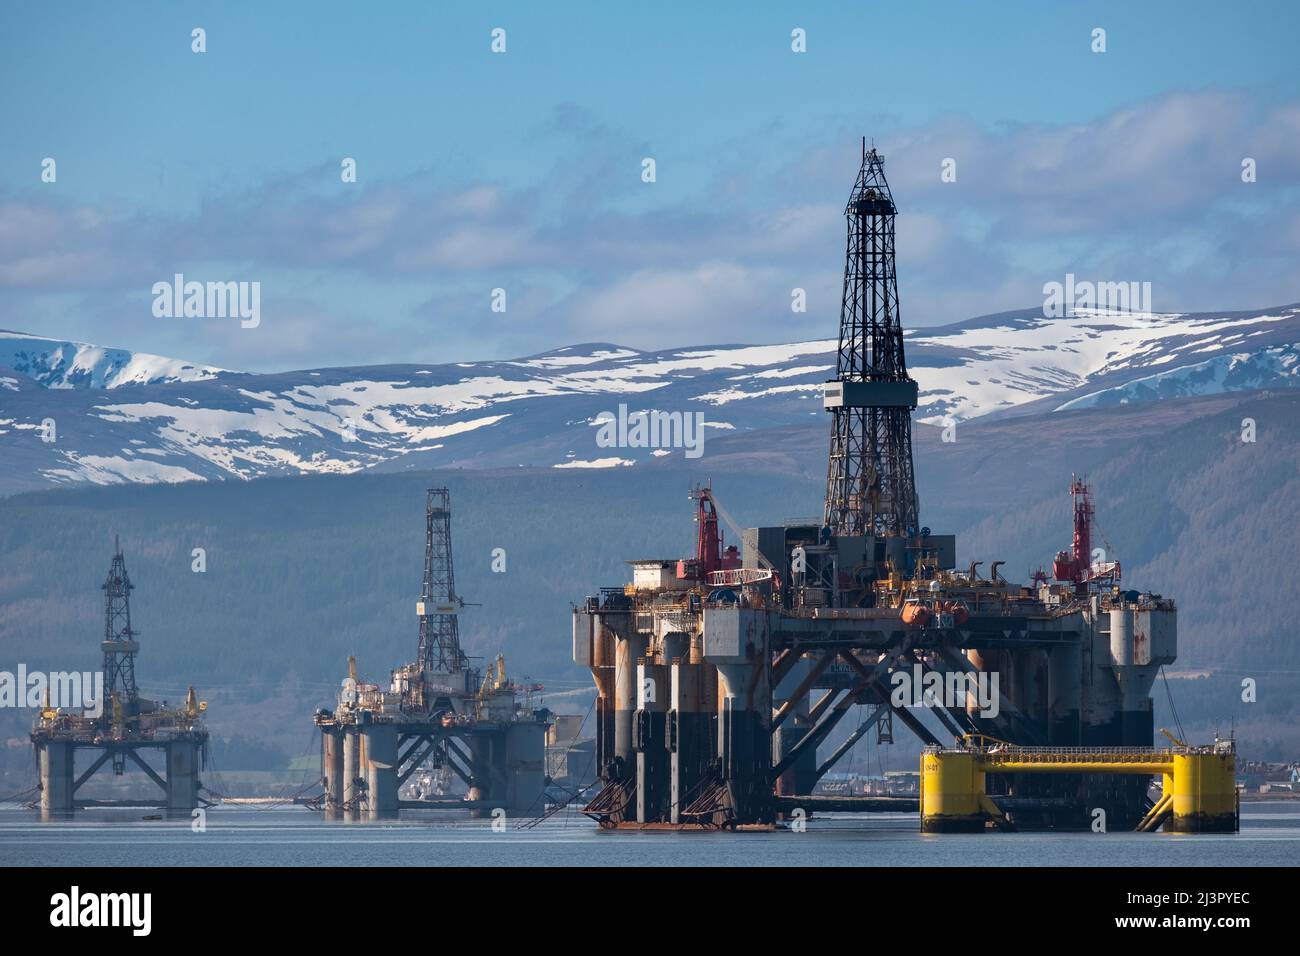 I love the juxtaposition in this composition, the towering structures of the drill rigs brought into the Cromarty Firth for decomissioning with the st Stock Photo